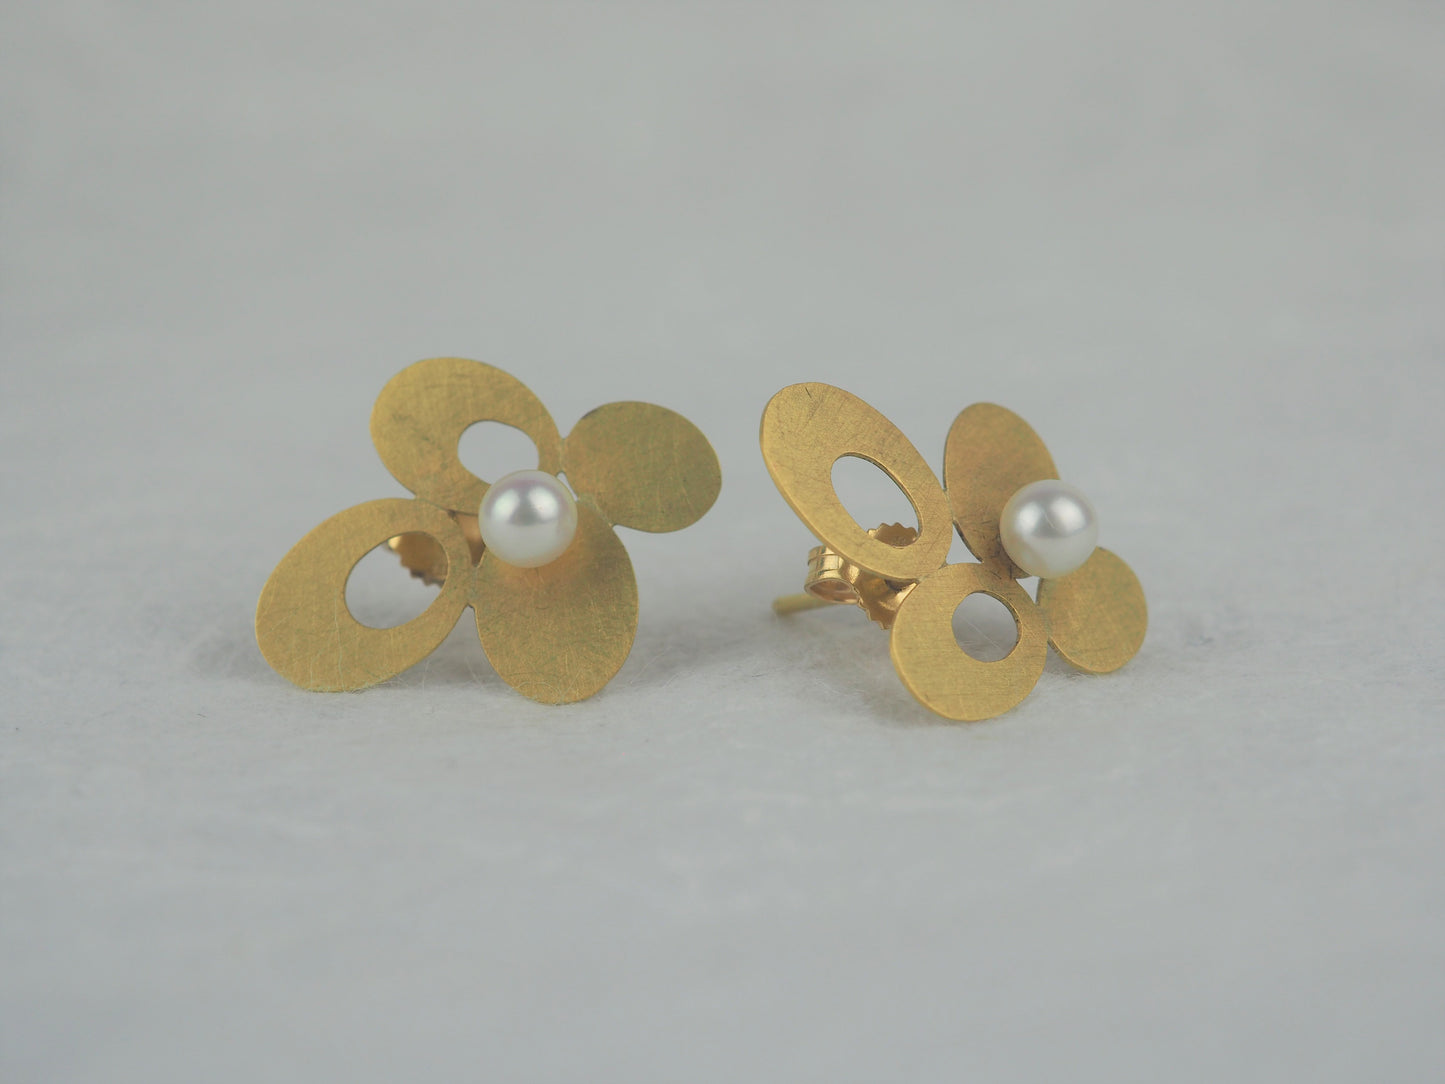 Krinos, Daphne – Gold and Pearl Studs